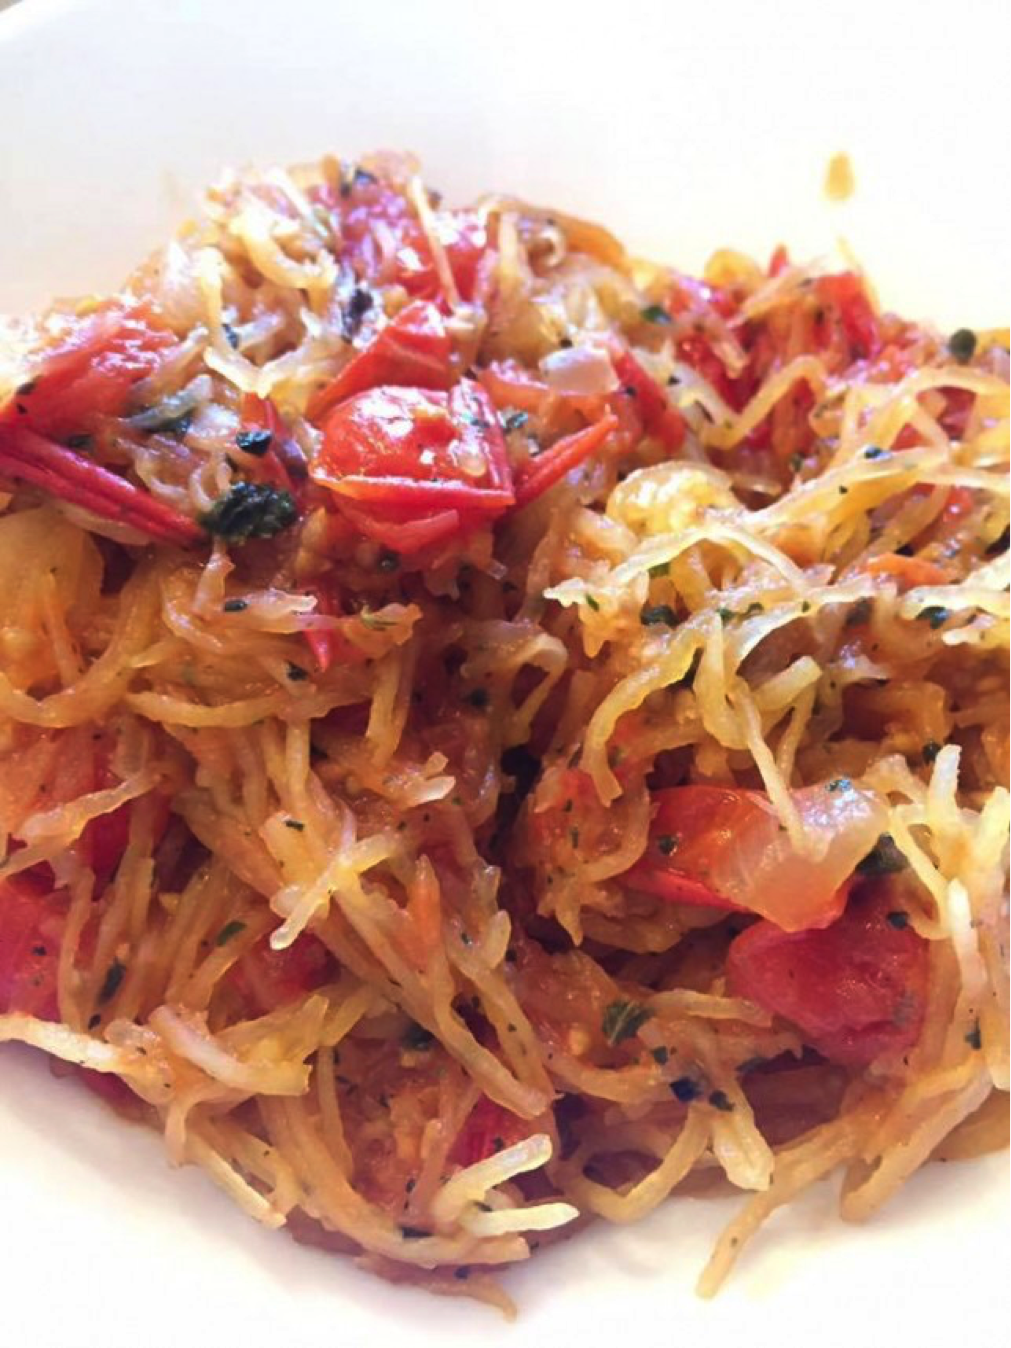 My wife Kirin made THE best spaghetti squash recipe ever – uses all ingredients from the “unlimited” food list from the Adrenal Reset Diet.